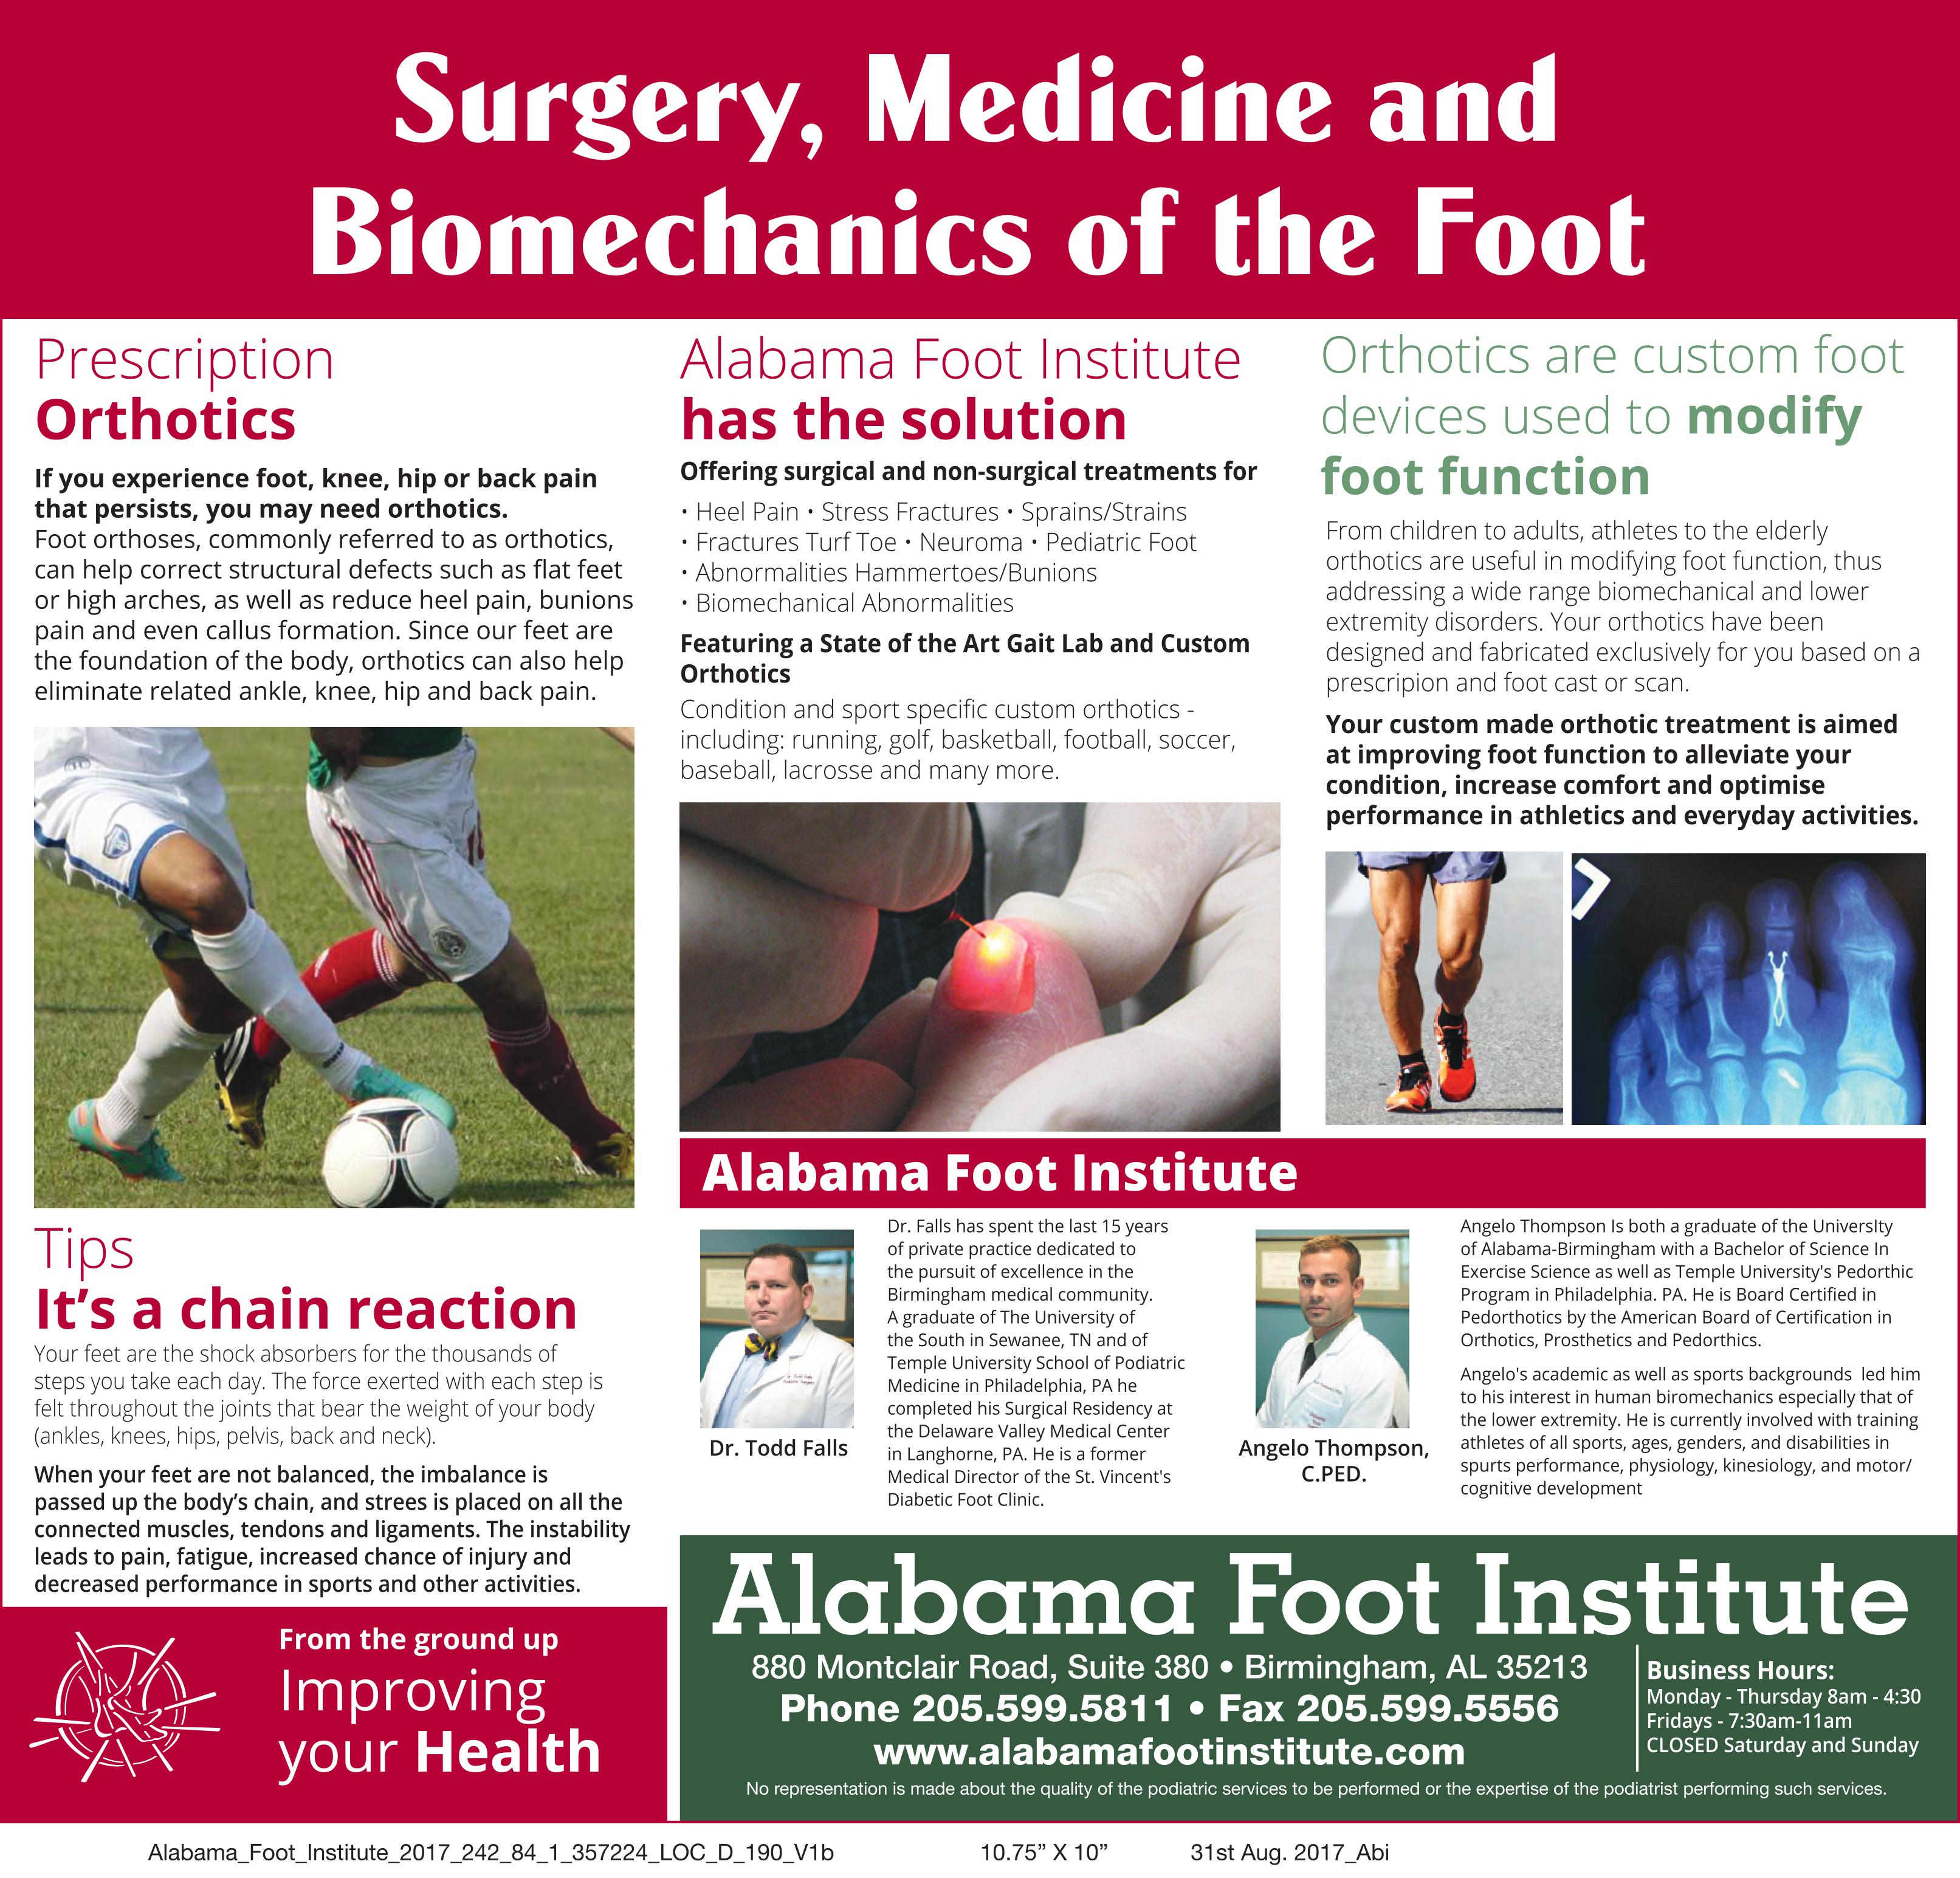 Q&A: Alabama Foot Institute has the answers